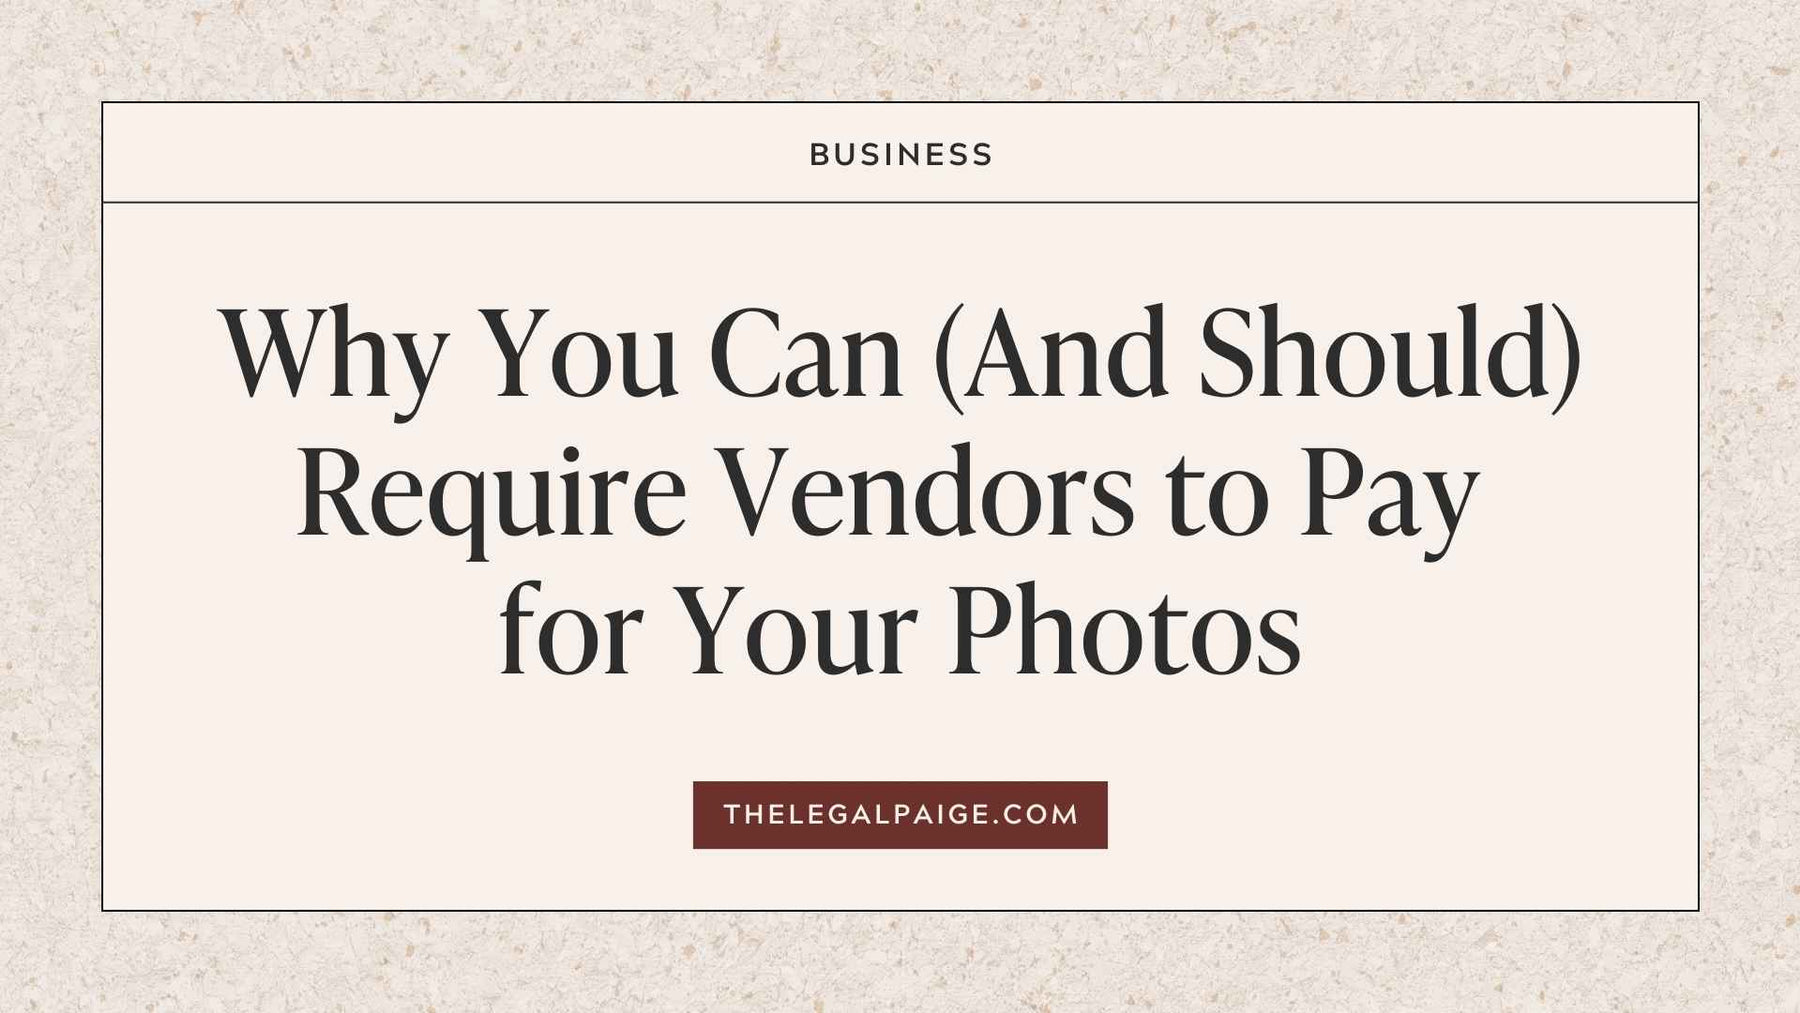 The Legal Paige Blog - Why You Can (And Should) Require Vendors To Pay for Your Photos